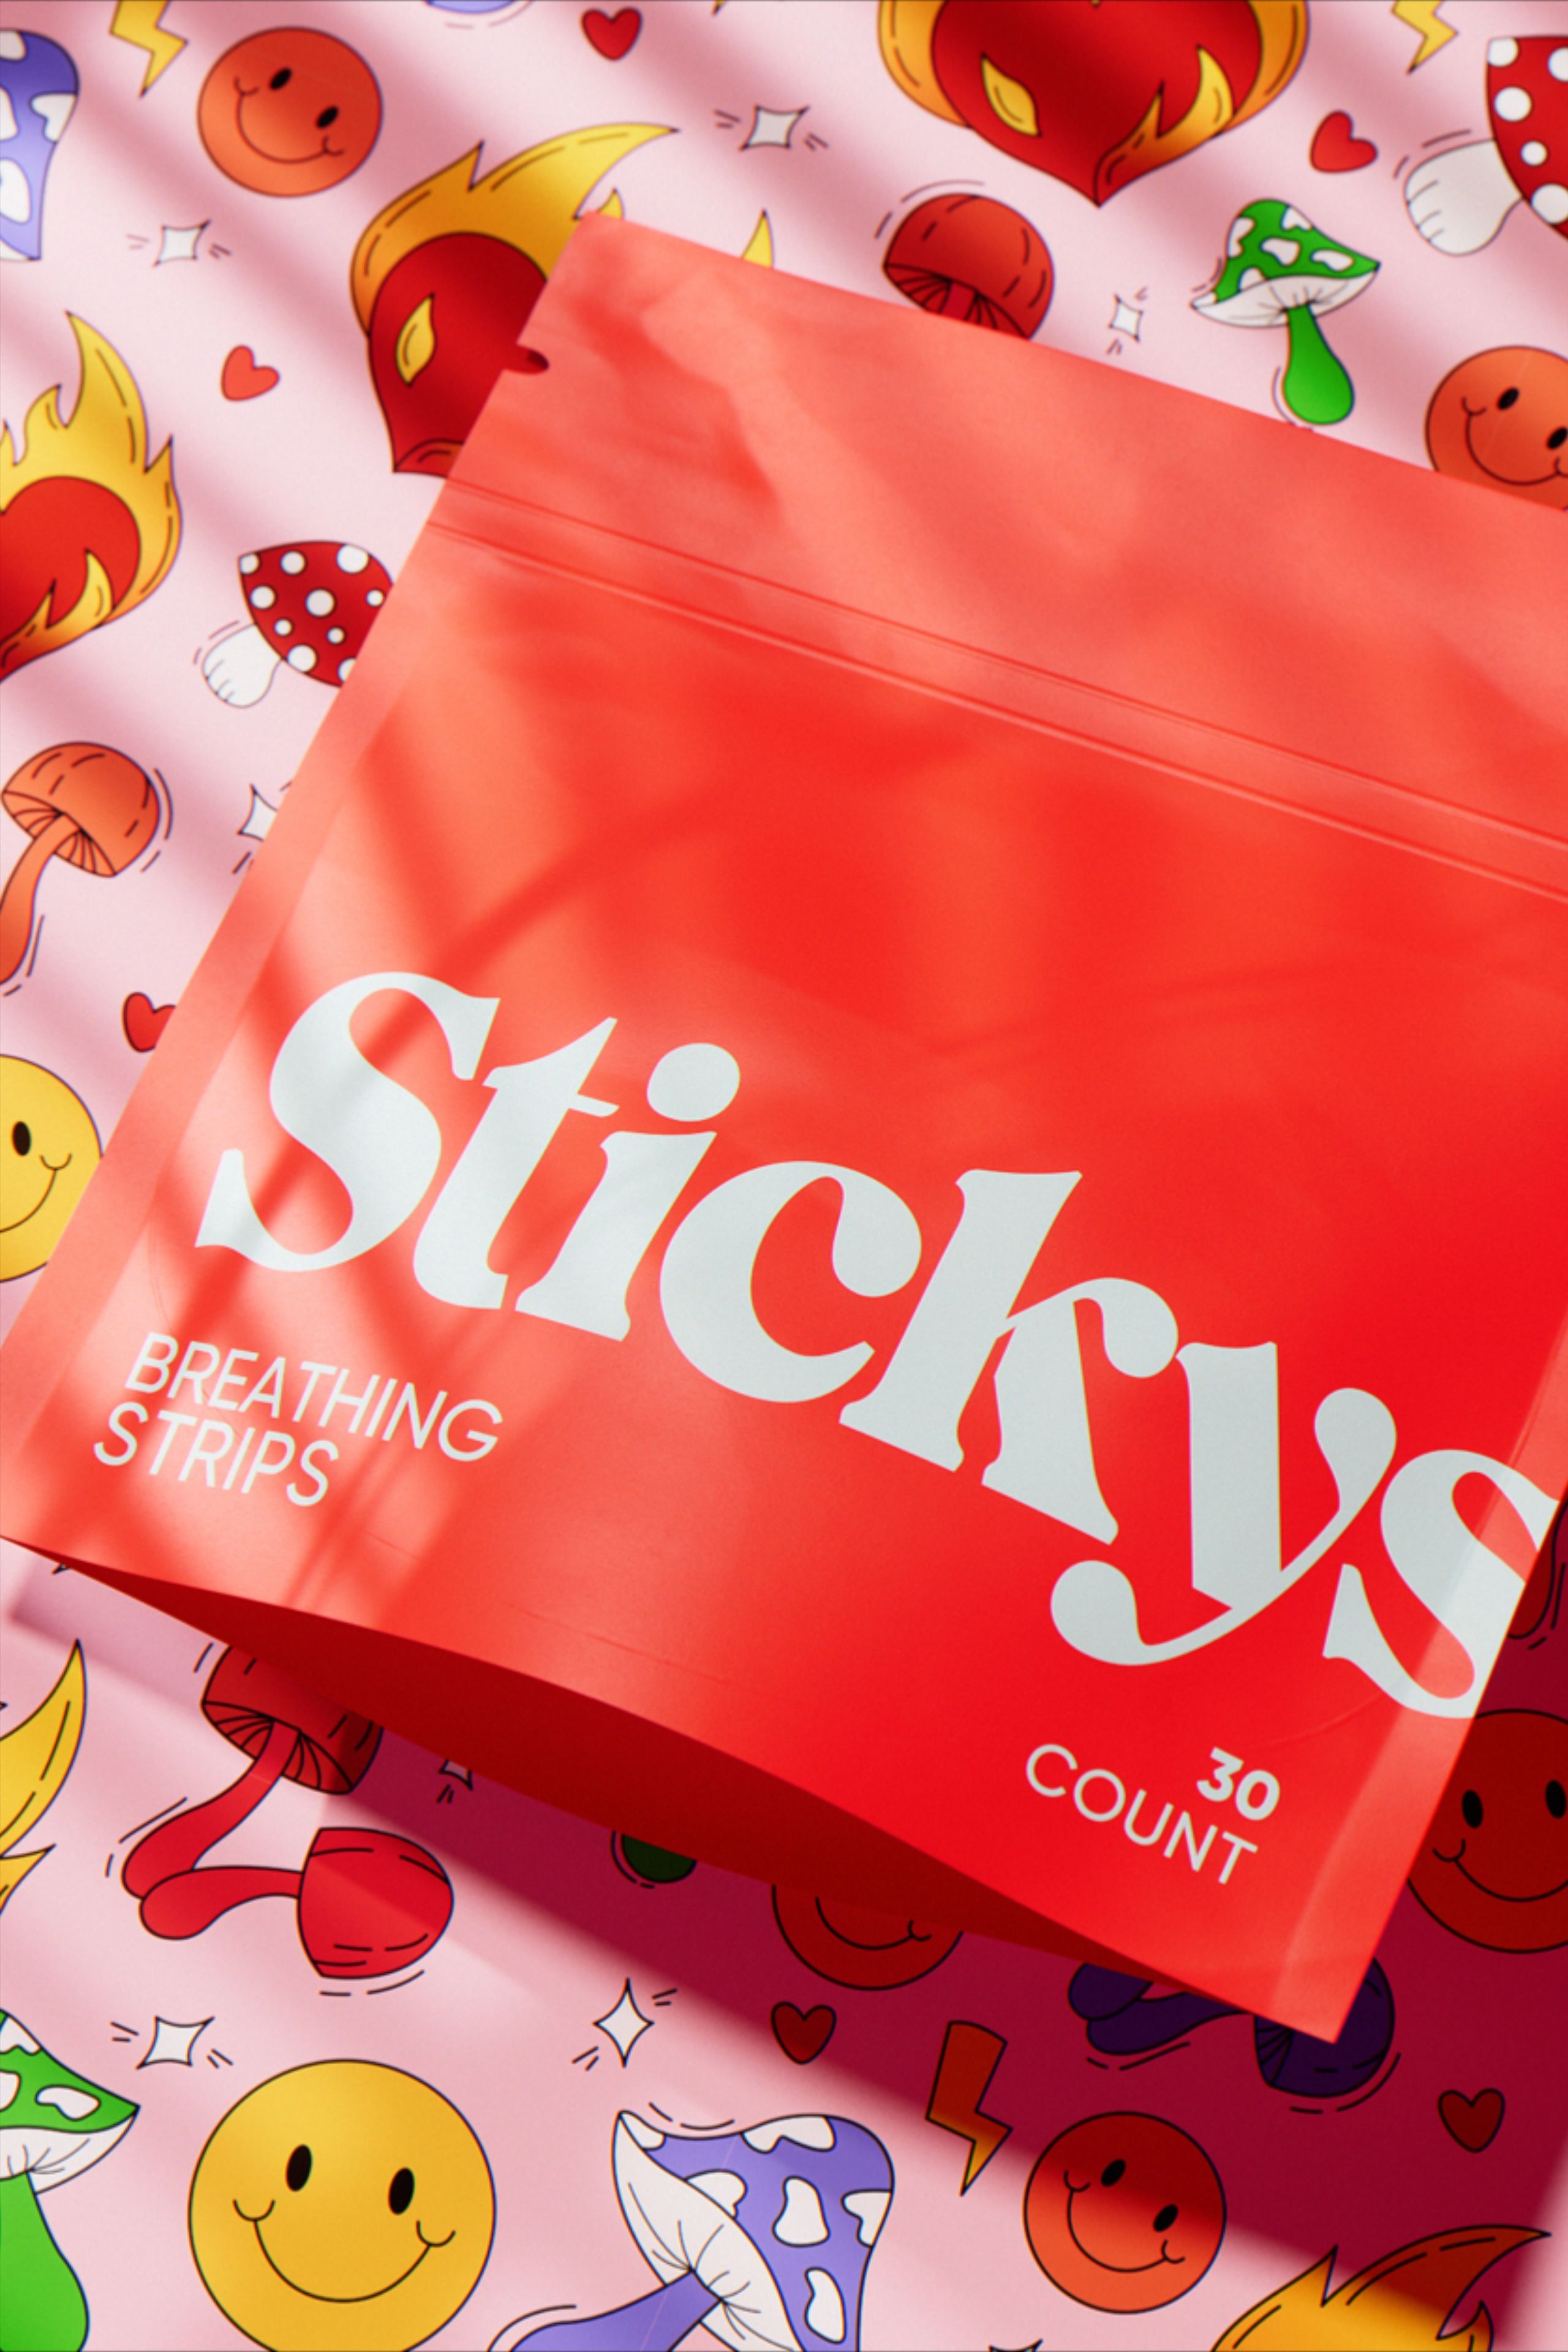 Stickys’ Reimagines The Potential Of Breathing Strips